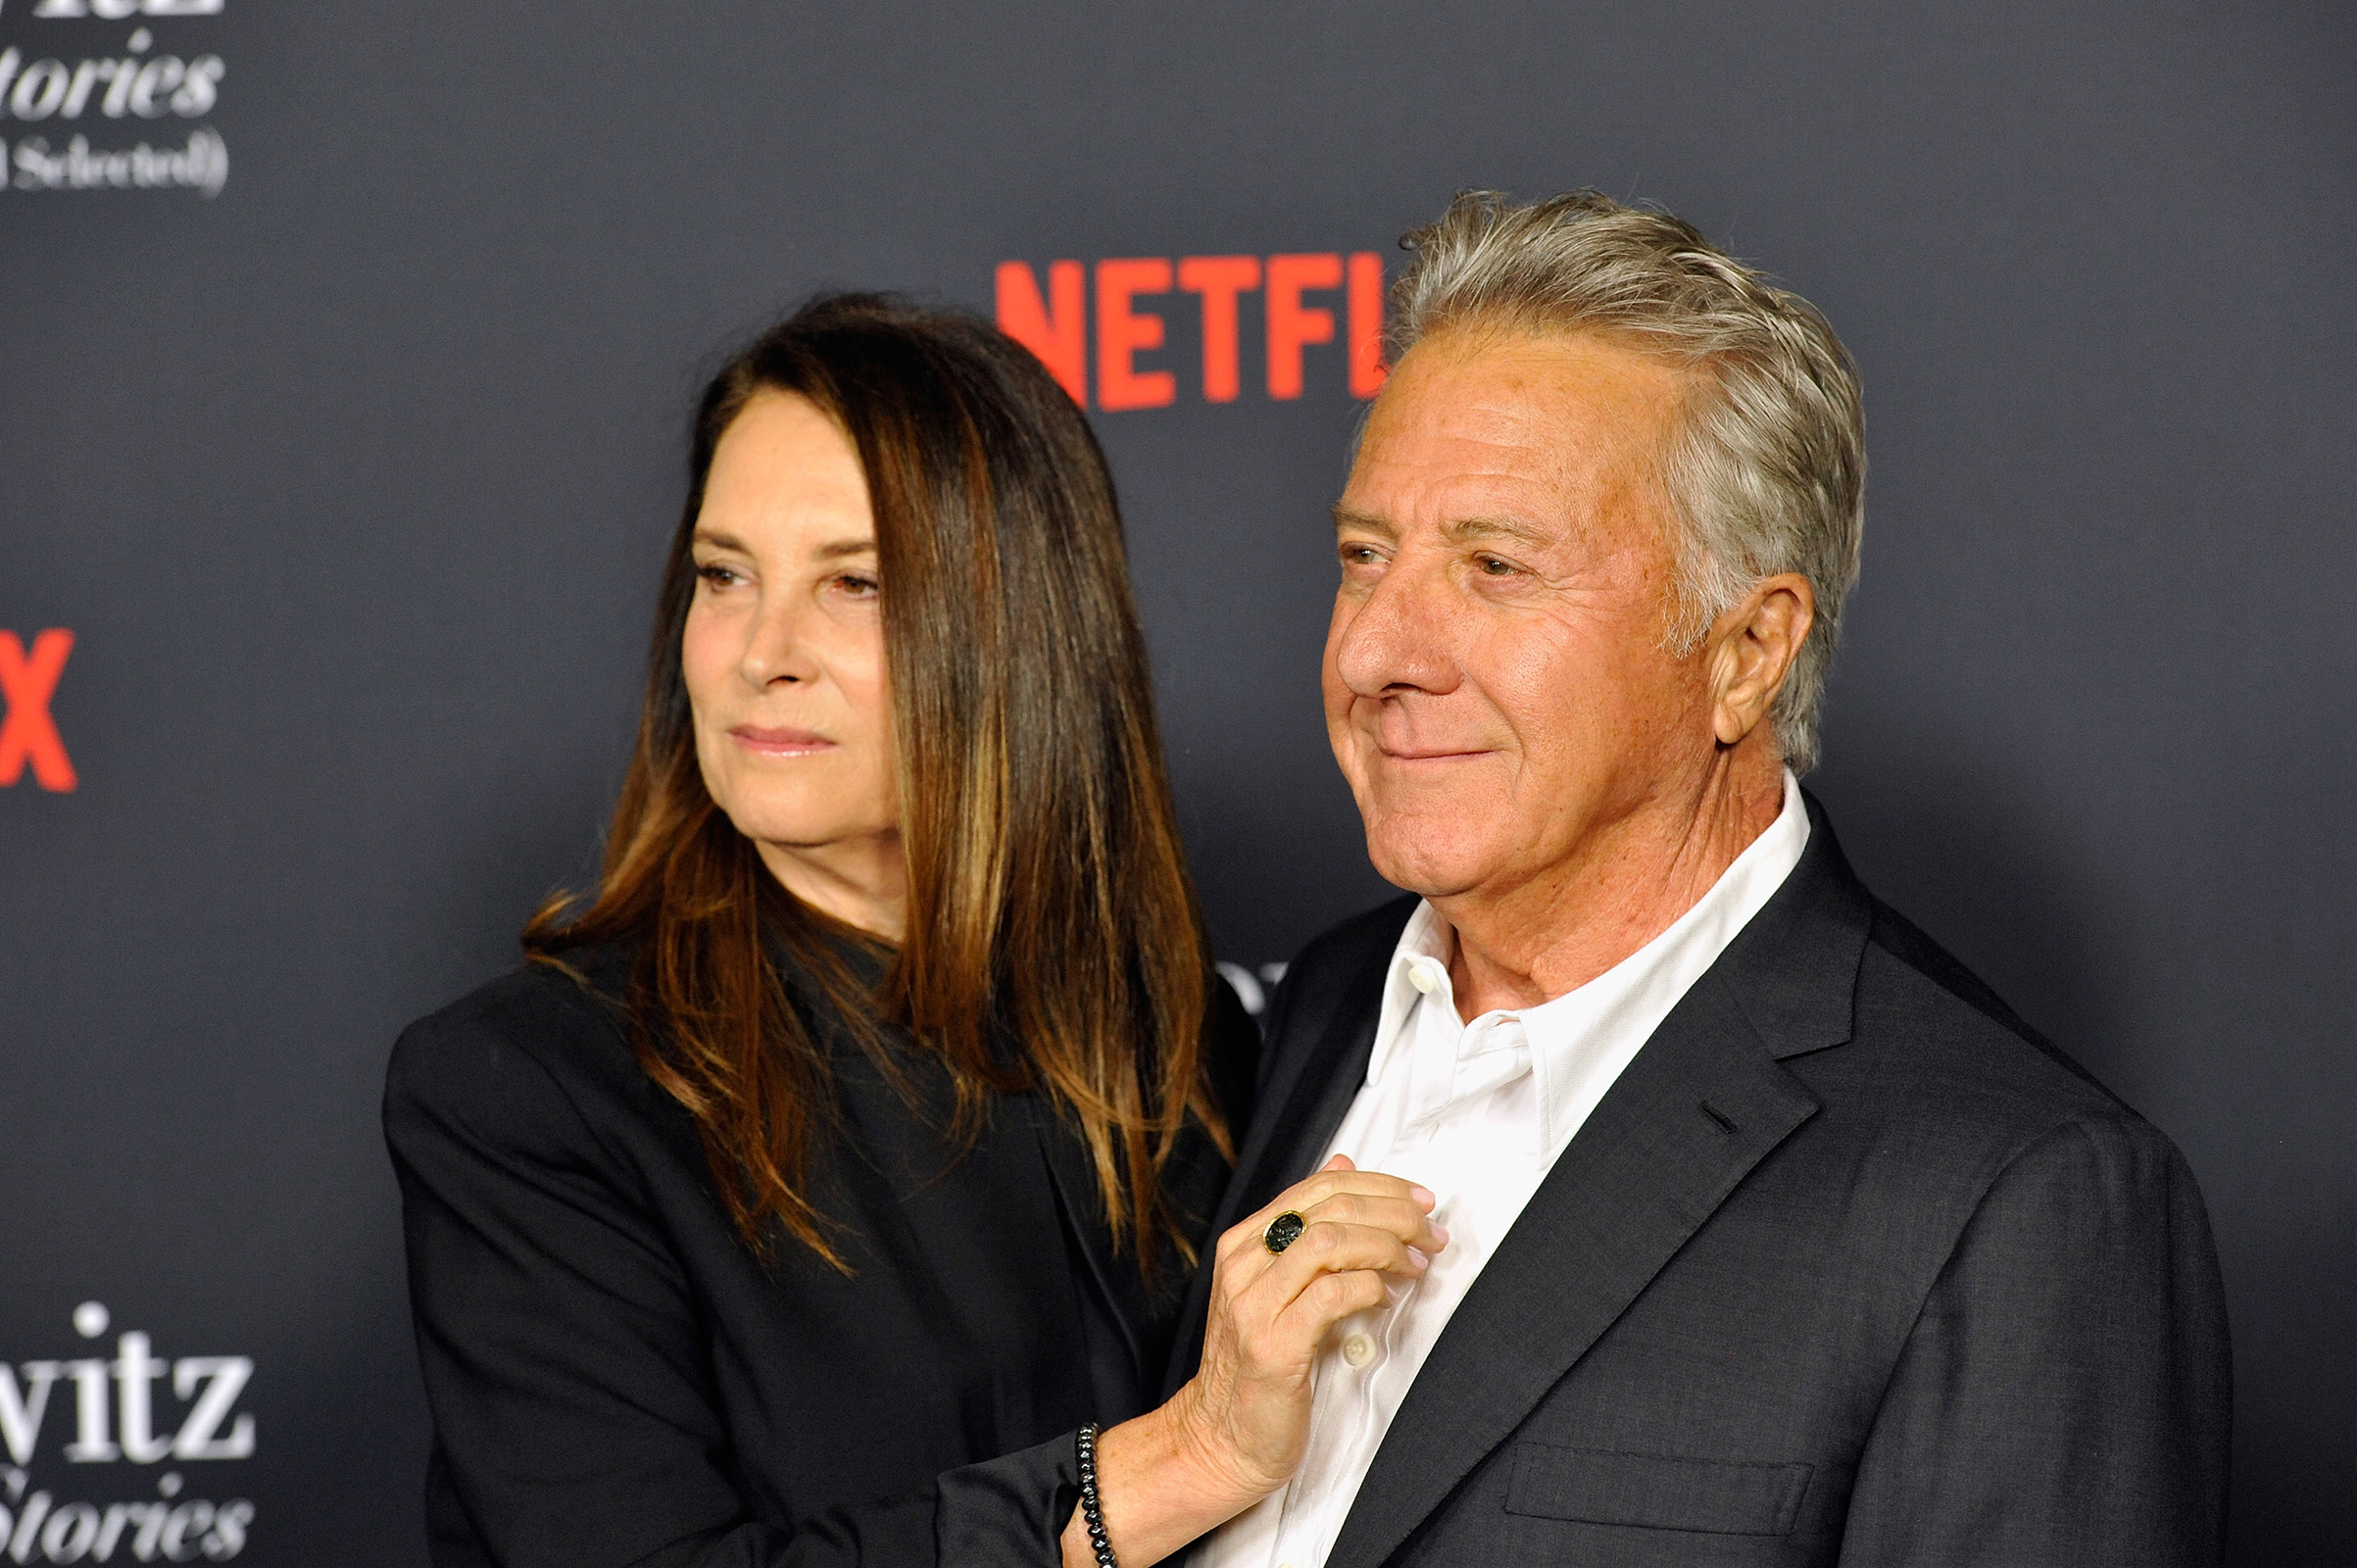 Lisa Hoffman and Dustin Hoffman attend a screening of Netflix's "The Meyerowitz Stories (New and Selected)" at Directors Guild Of America on Oct. 11, 2017 in Los Angeles. (Michael Tullberg—Getty Images)